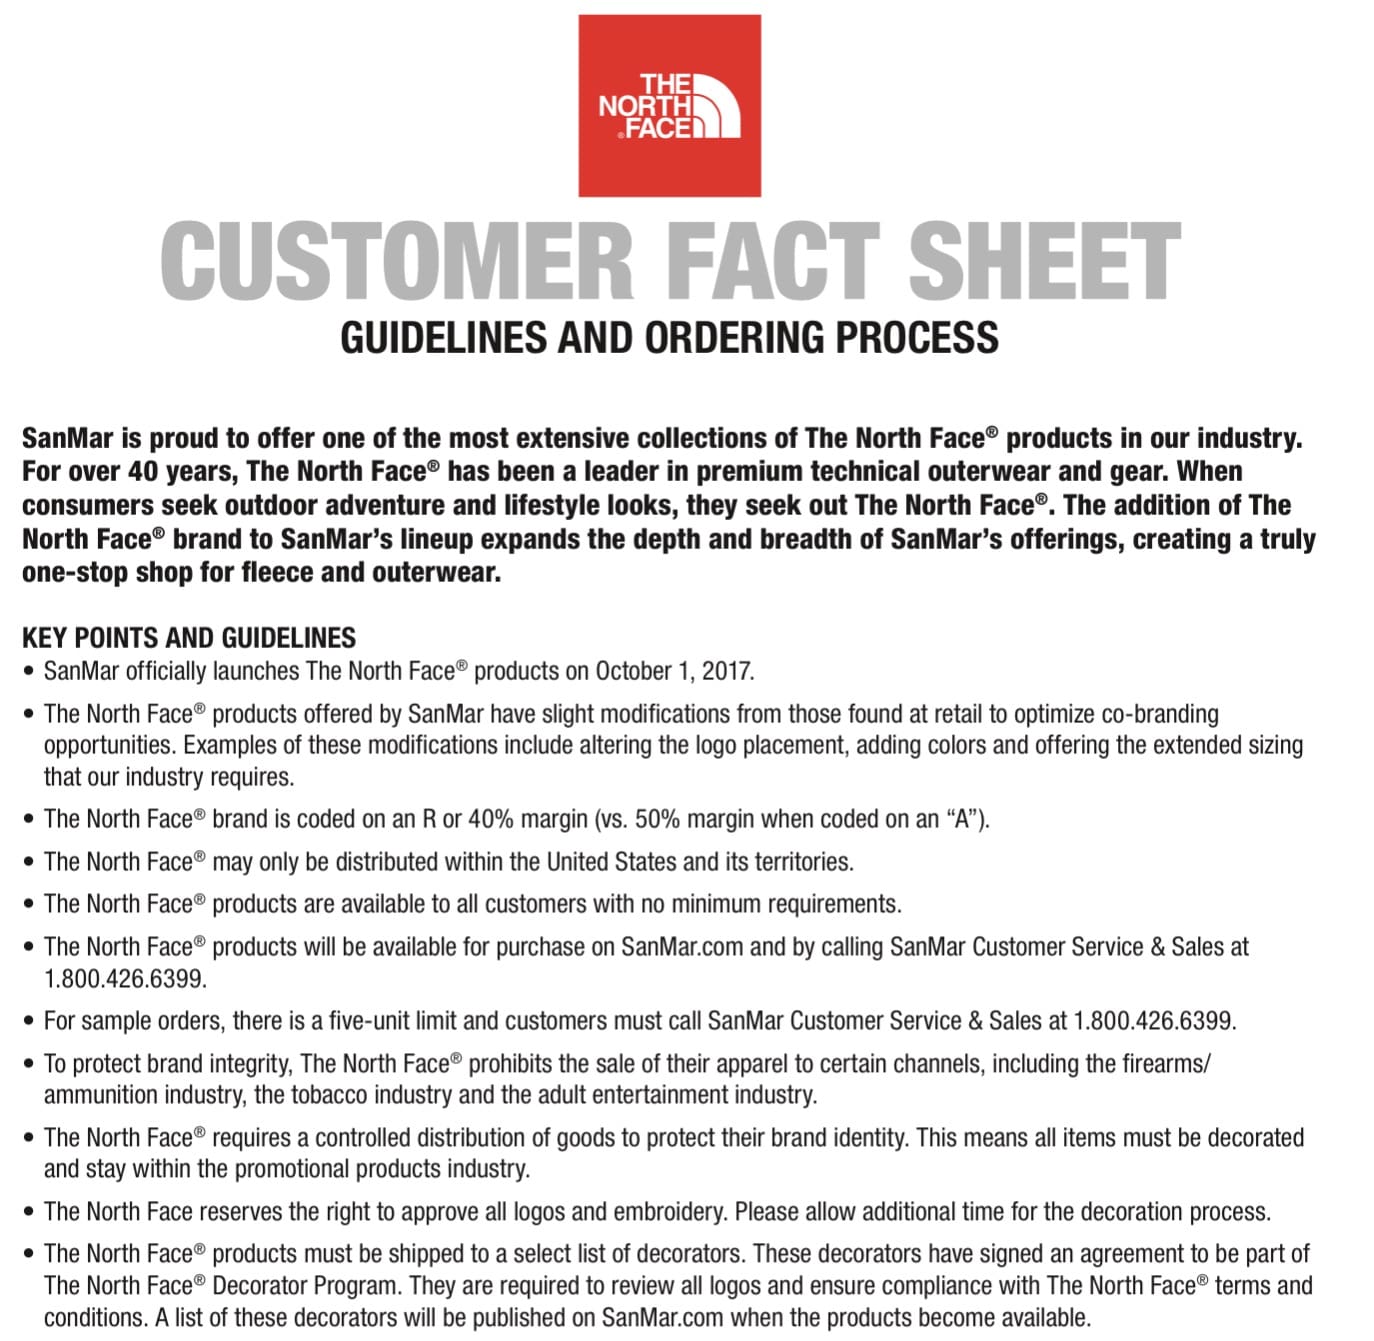 The North Face Return Policy and Warranty Information